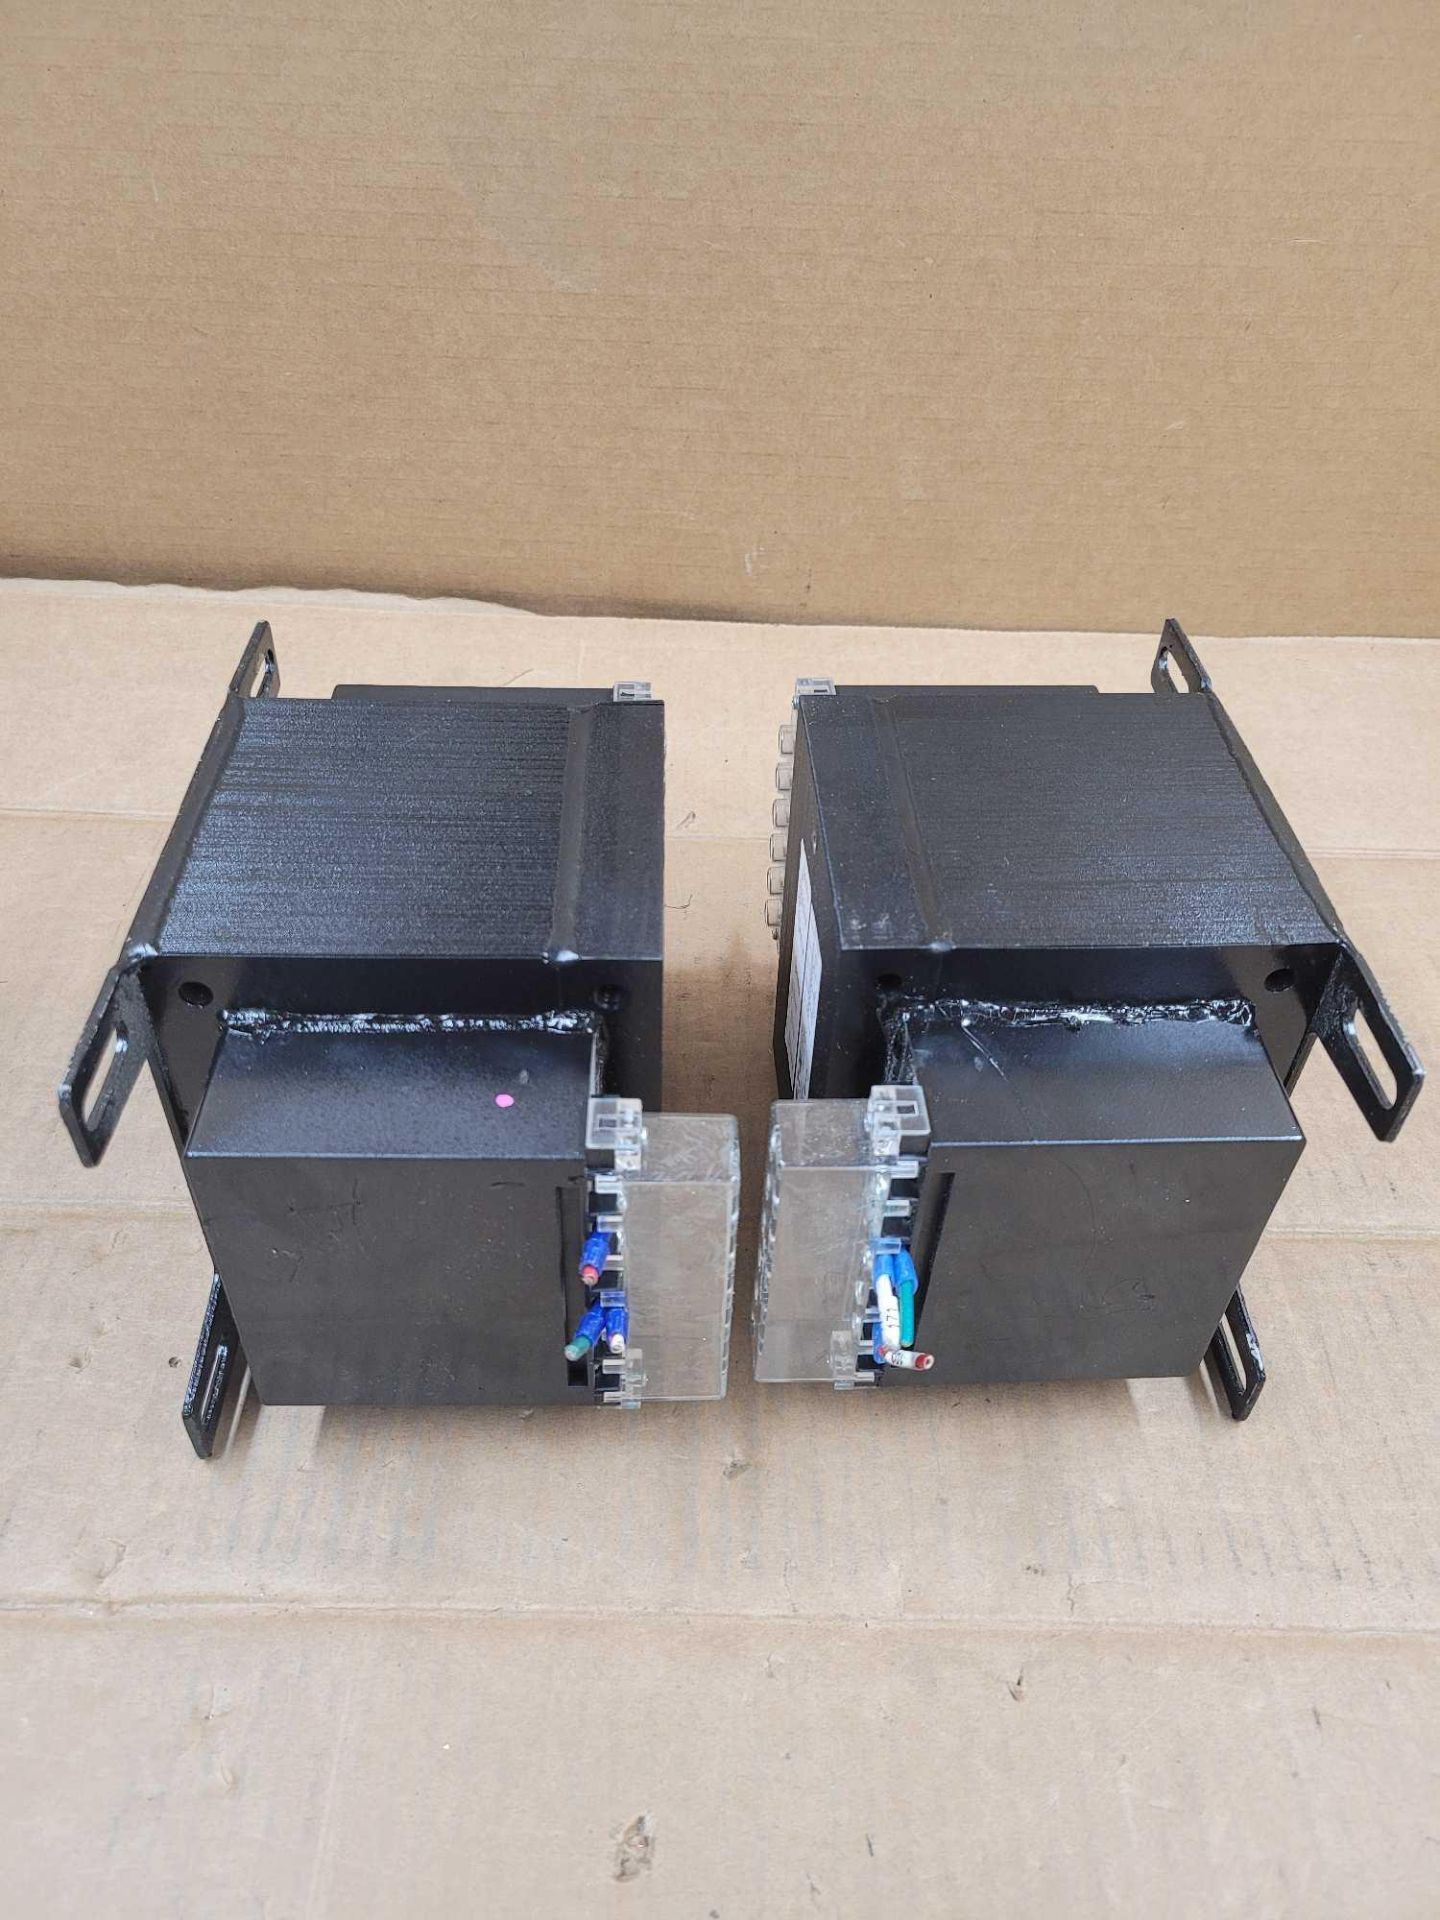 LOT OF 2 EATON C0500E6U / Industrial Control Transformer  /  Lot Weight: 49.0 lbs - Image 7 of 7